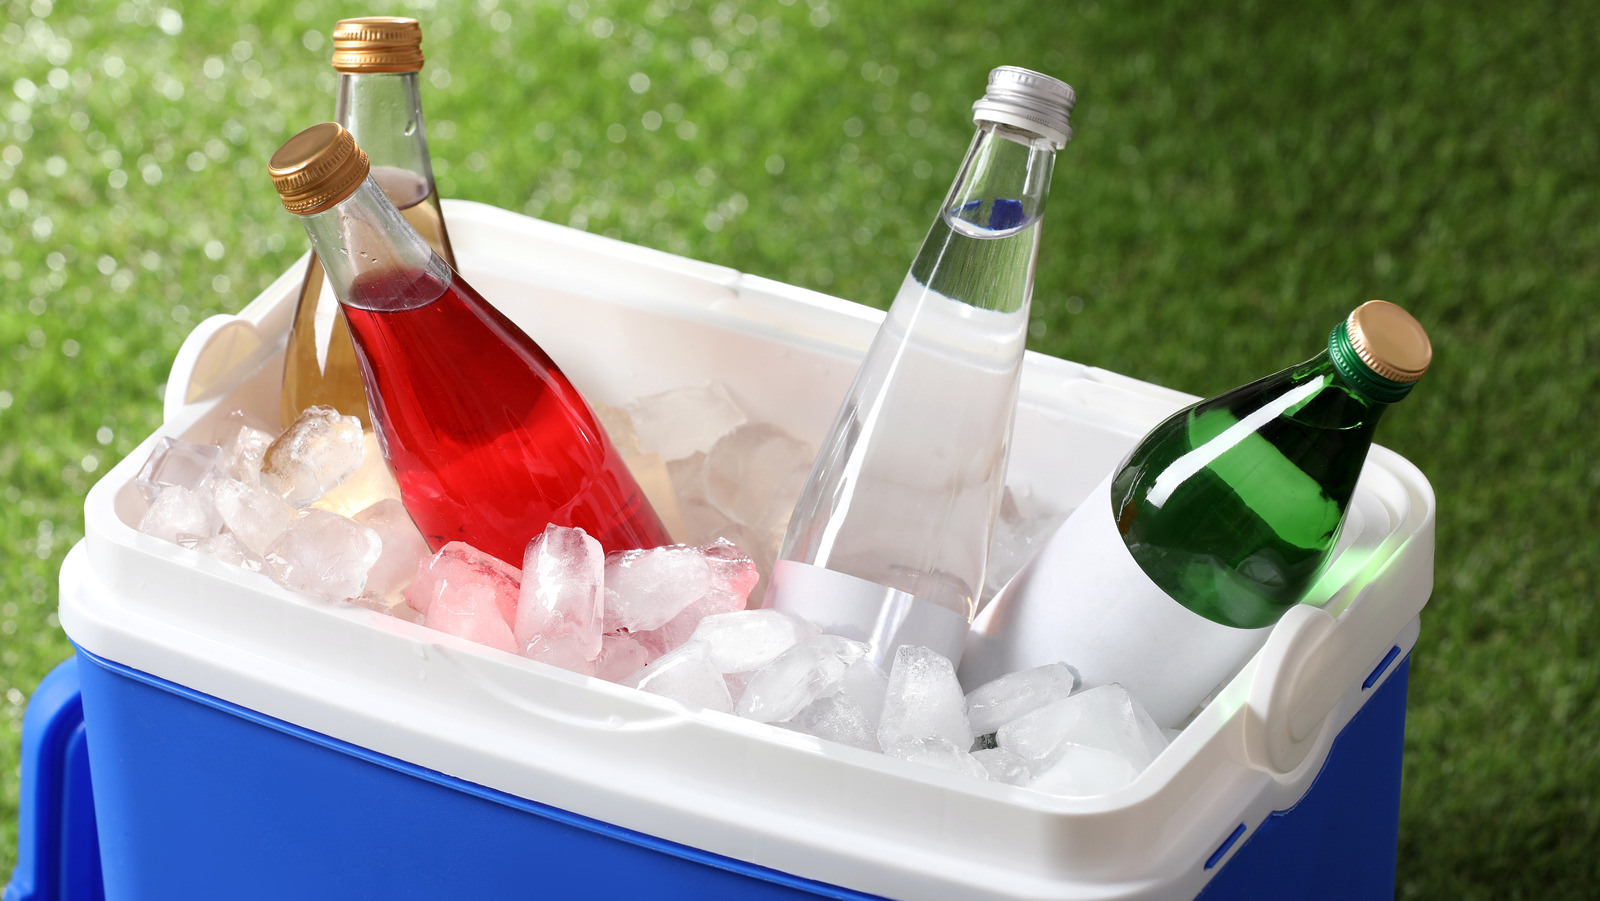 How To Keep A Cool Box ICE Cold (6 Tips You Have To Try) ❄️